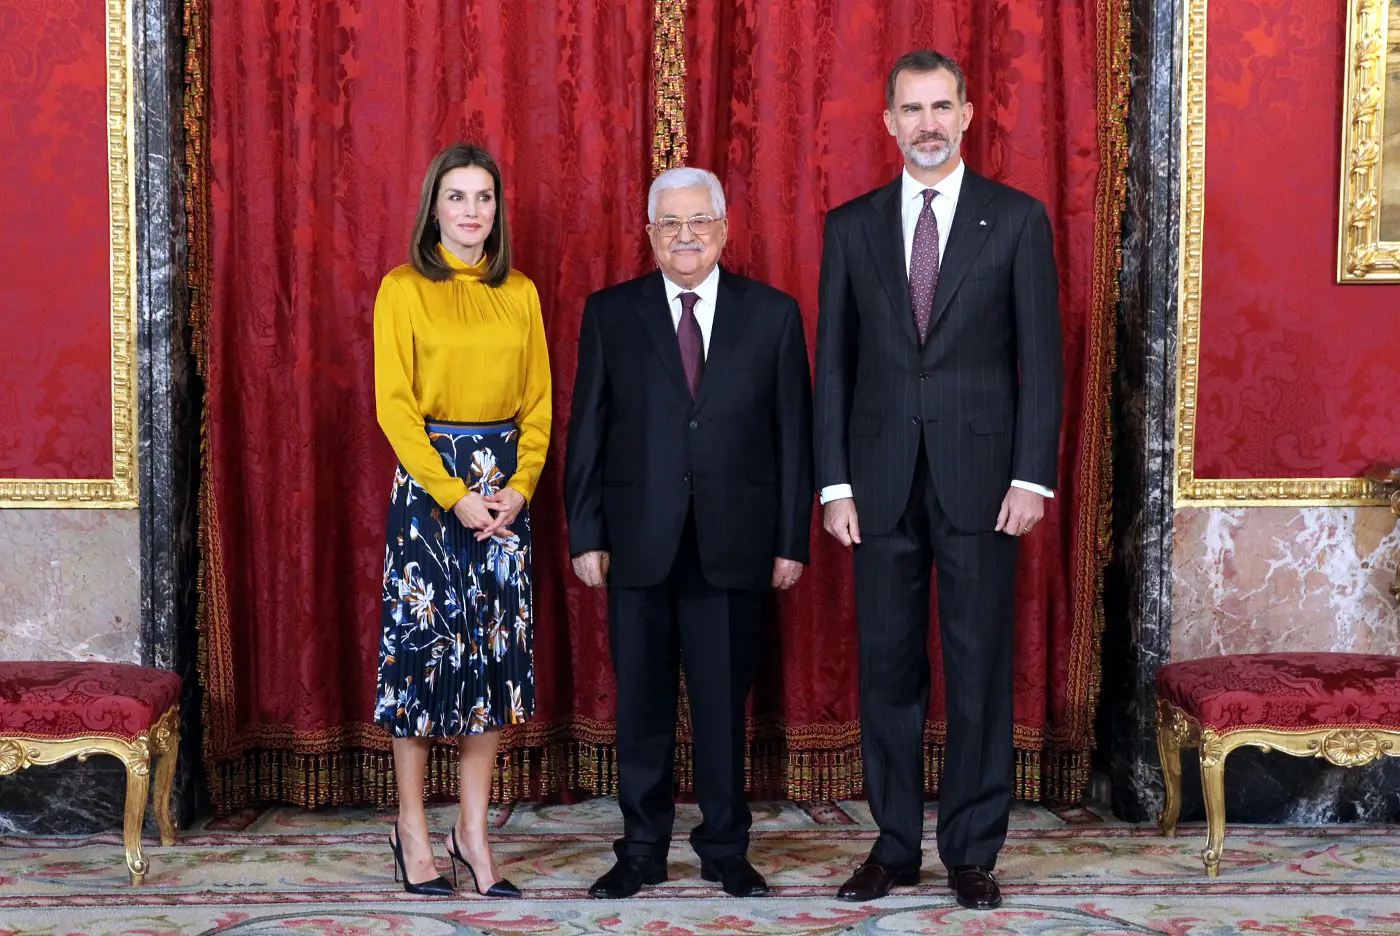 King Felipe and Queen Letizia welcomed President of Palestine at royal palace